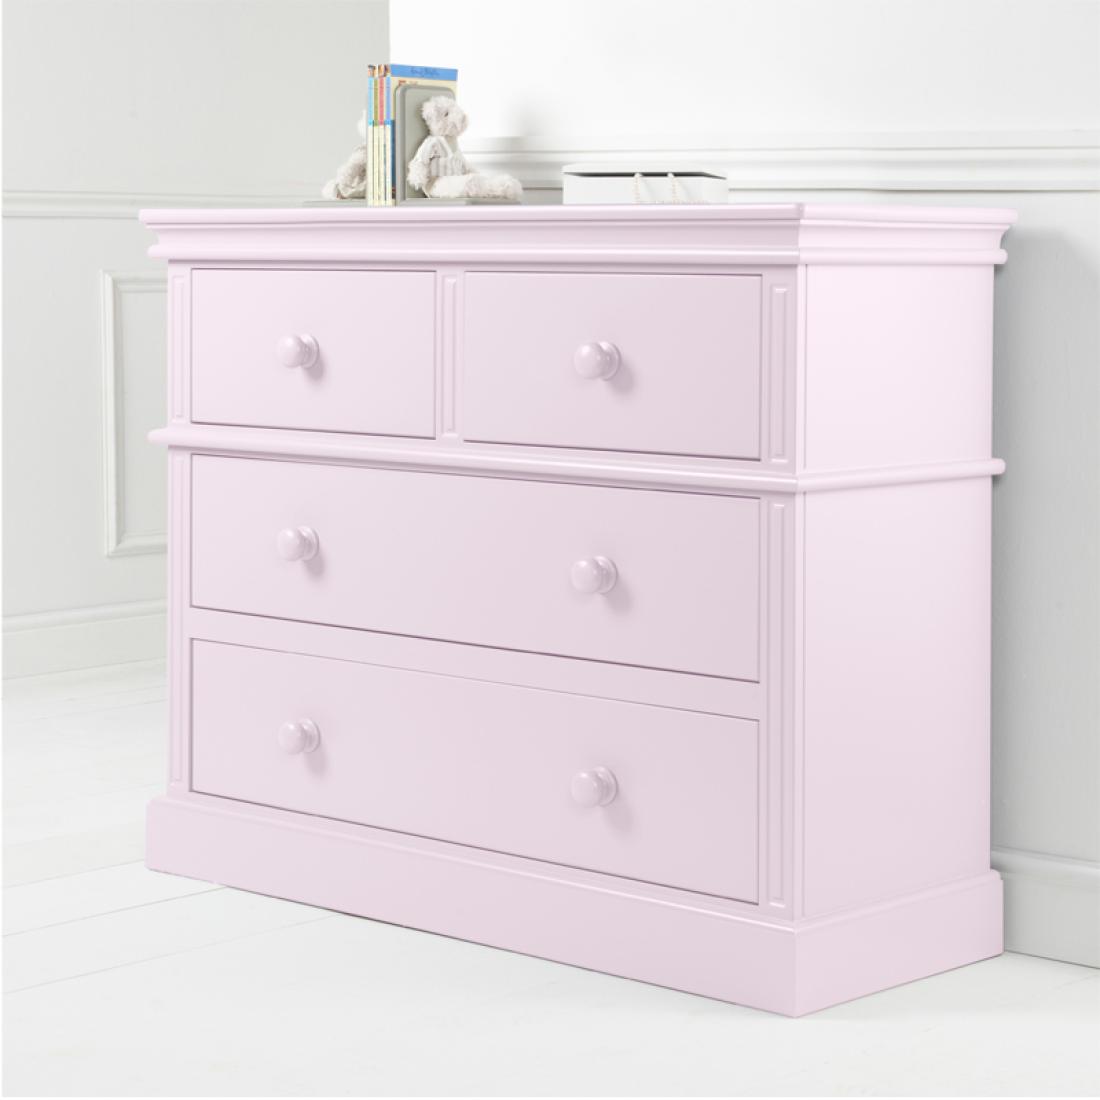 Archie 2 Over 2 Chest of Drawers | Boys Chest of Drawers | Kids ...